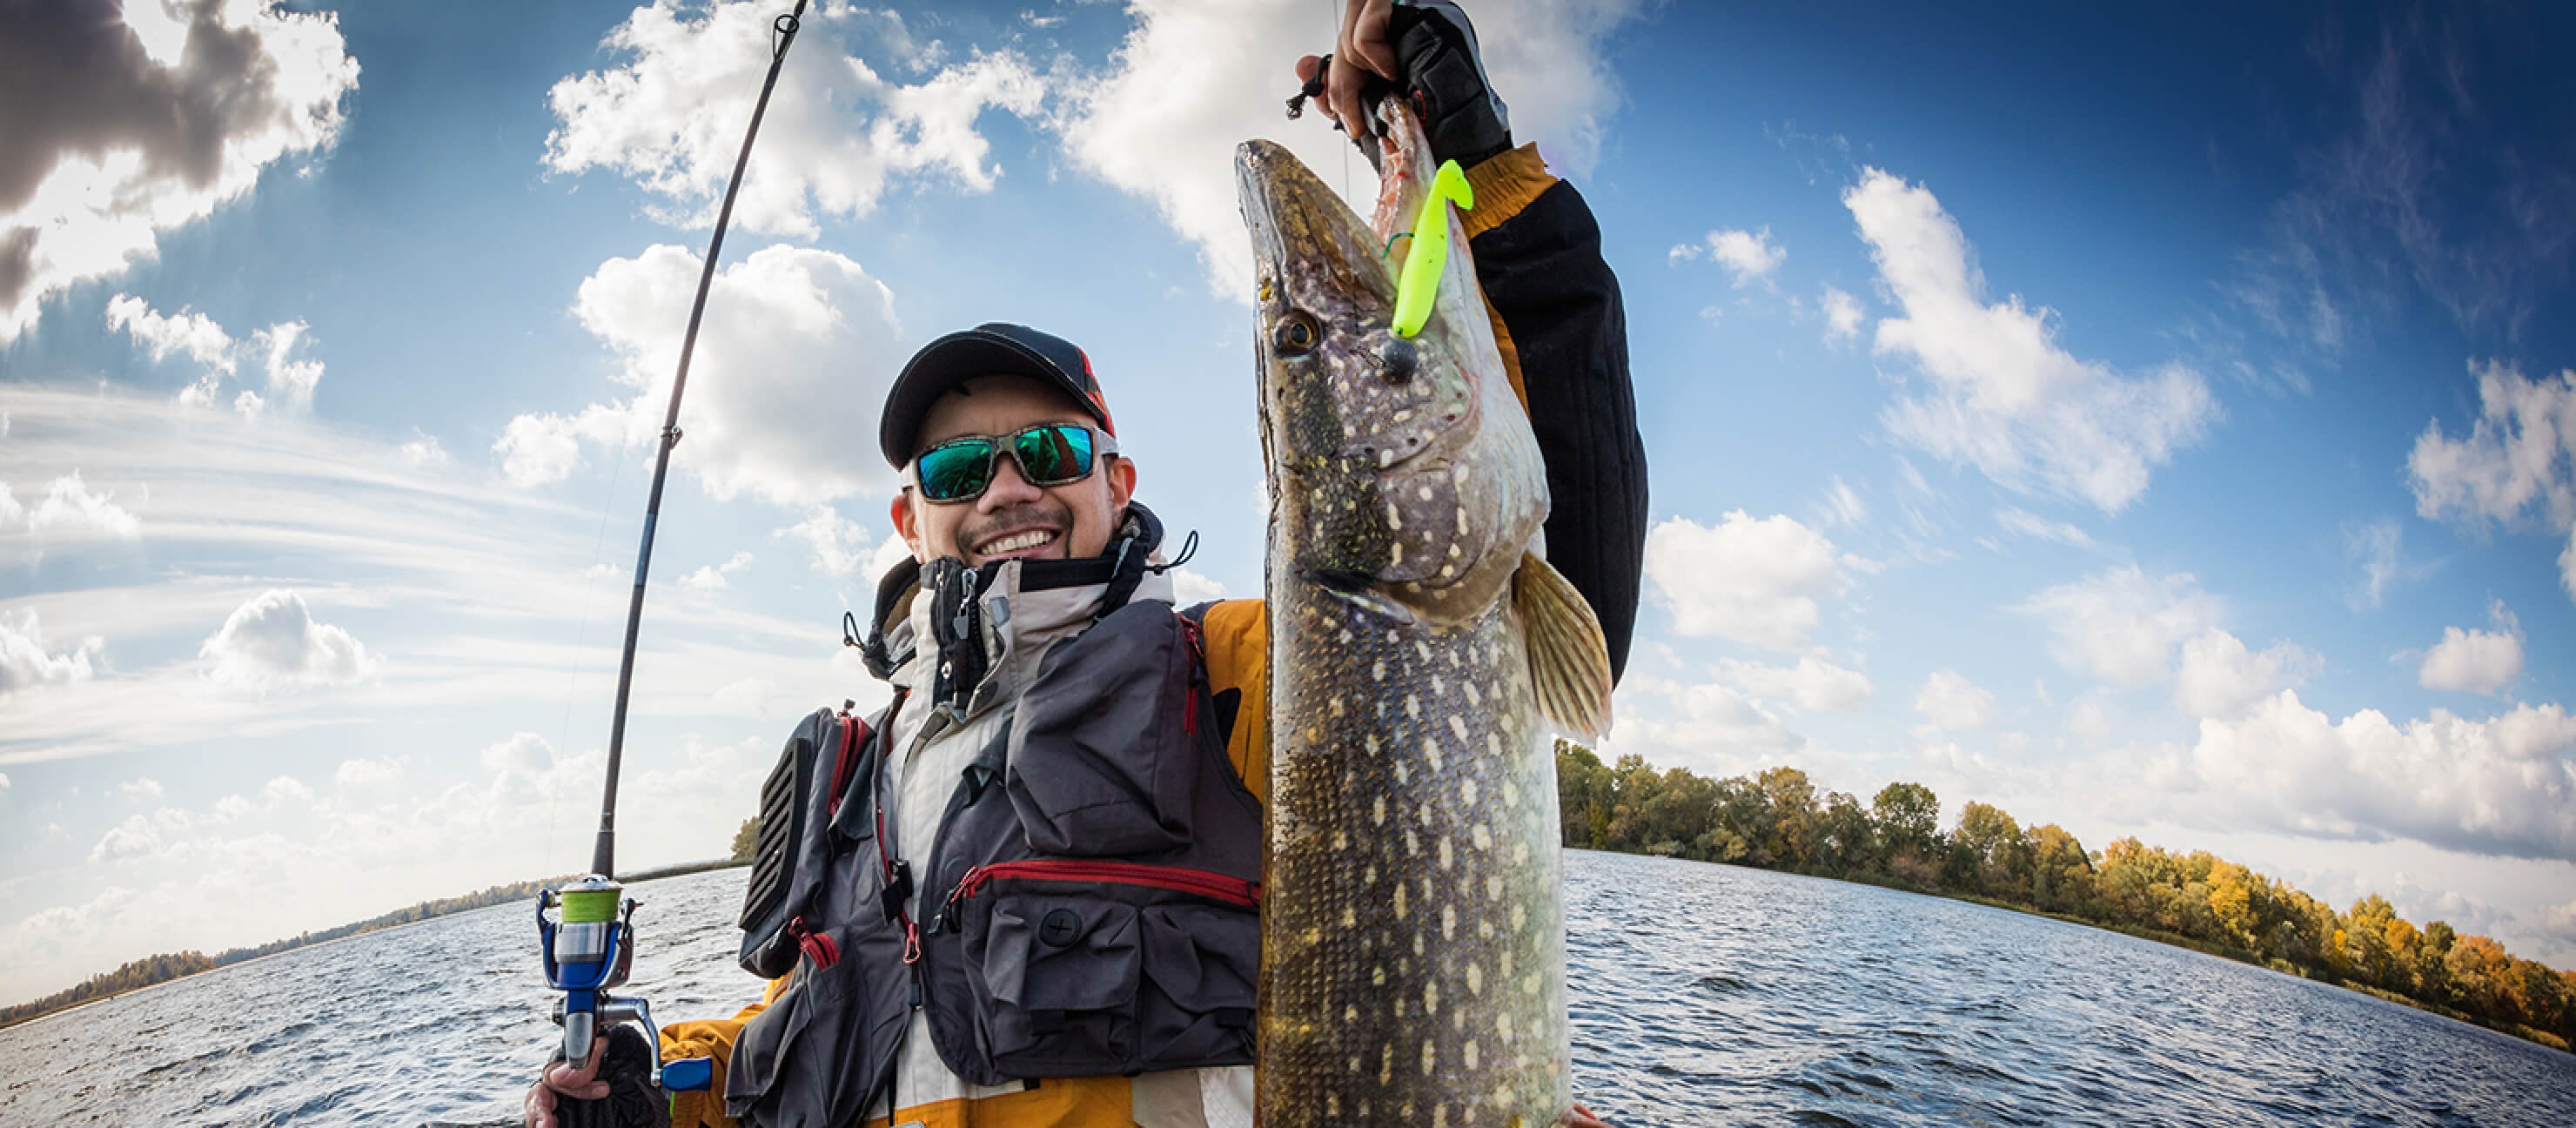 21 Fishing Tips for Beginners To Be a Better Angler